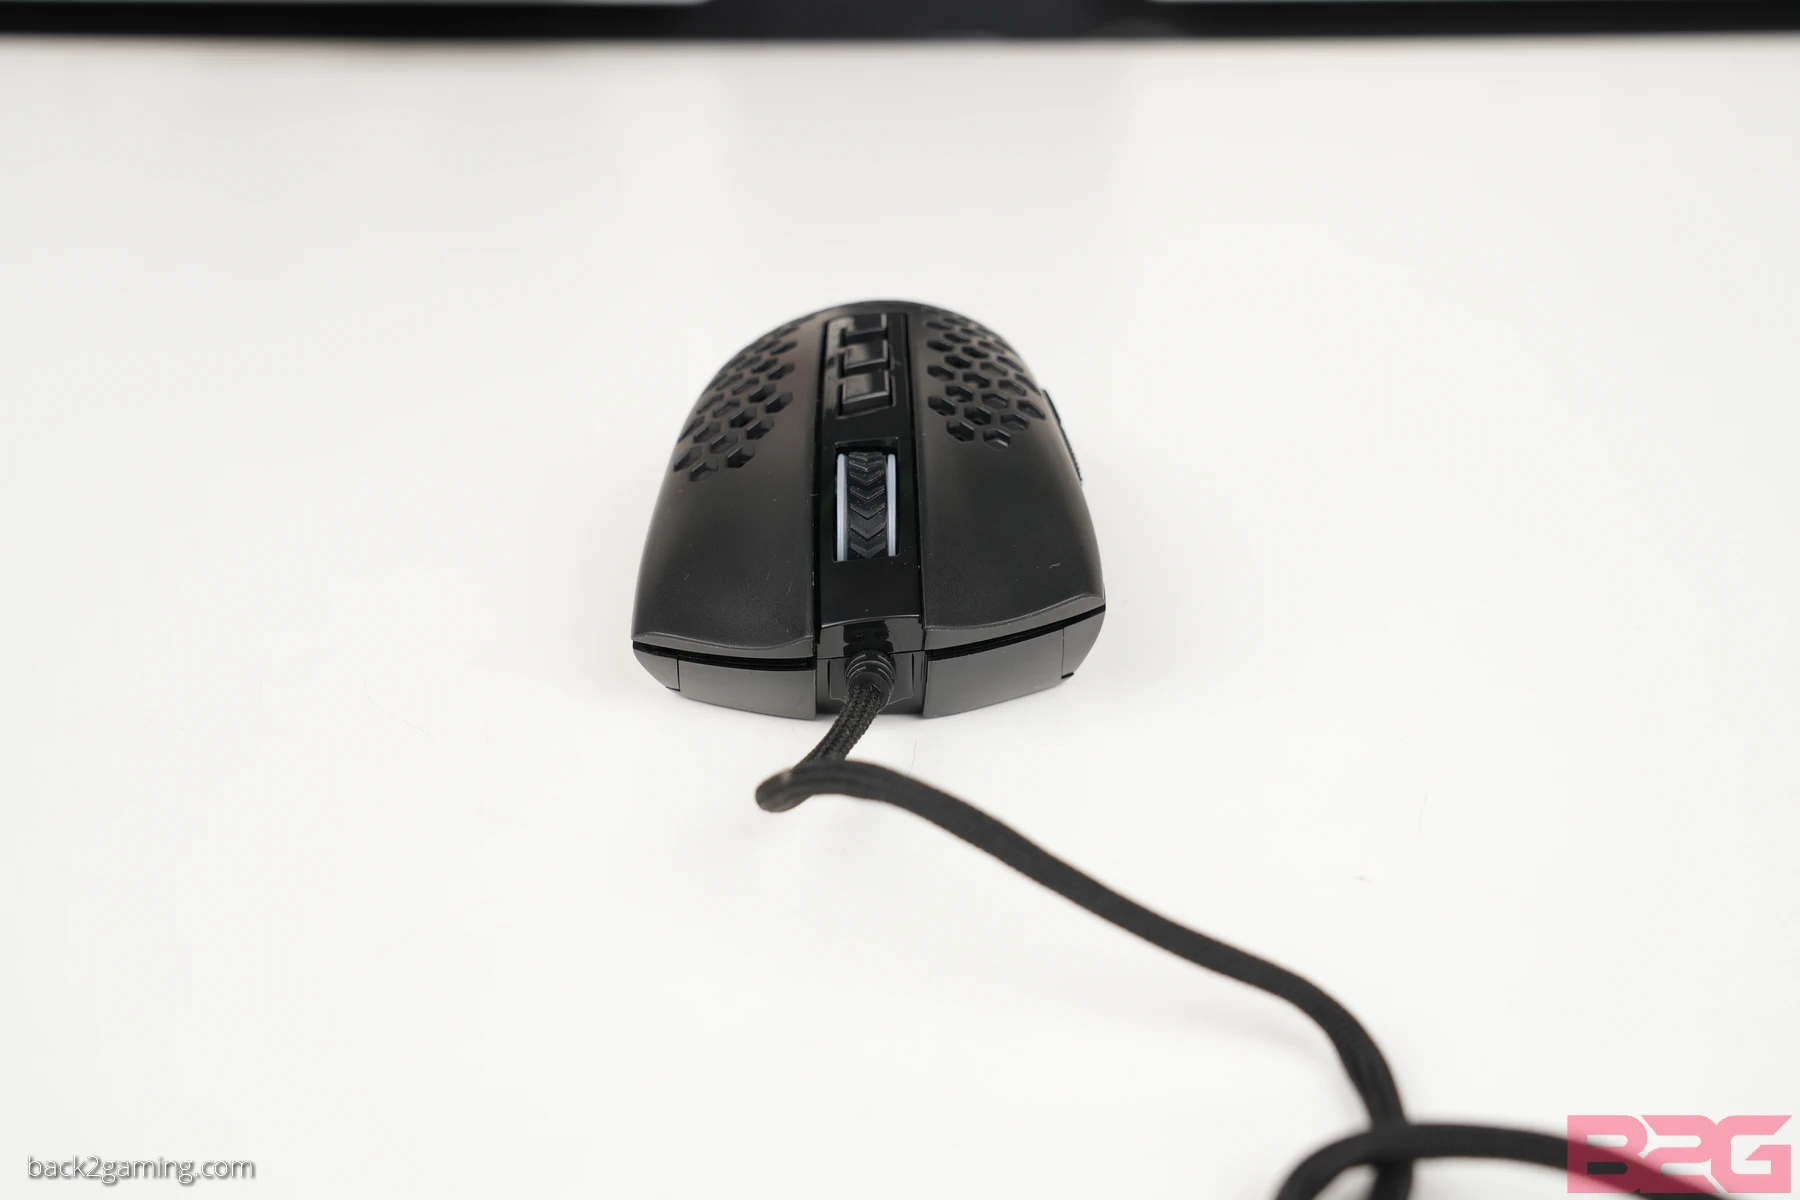 Redragon Storm M808 Gaming Mouse Review - returnal